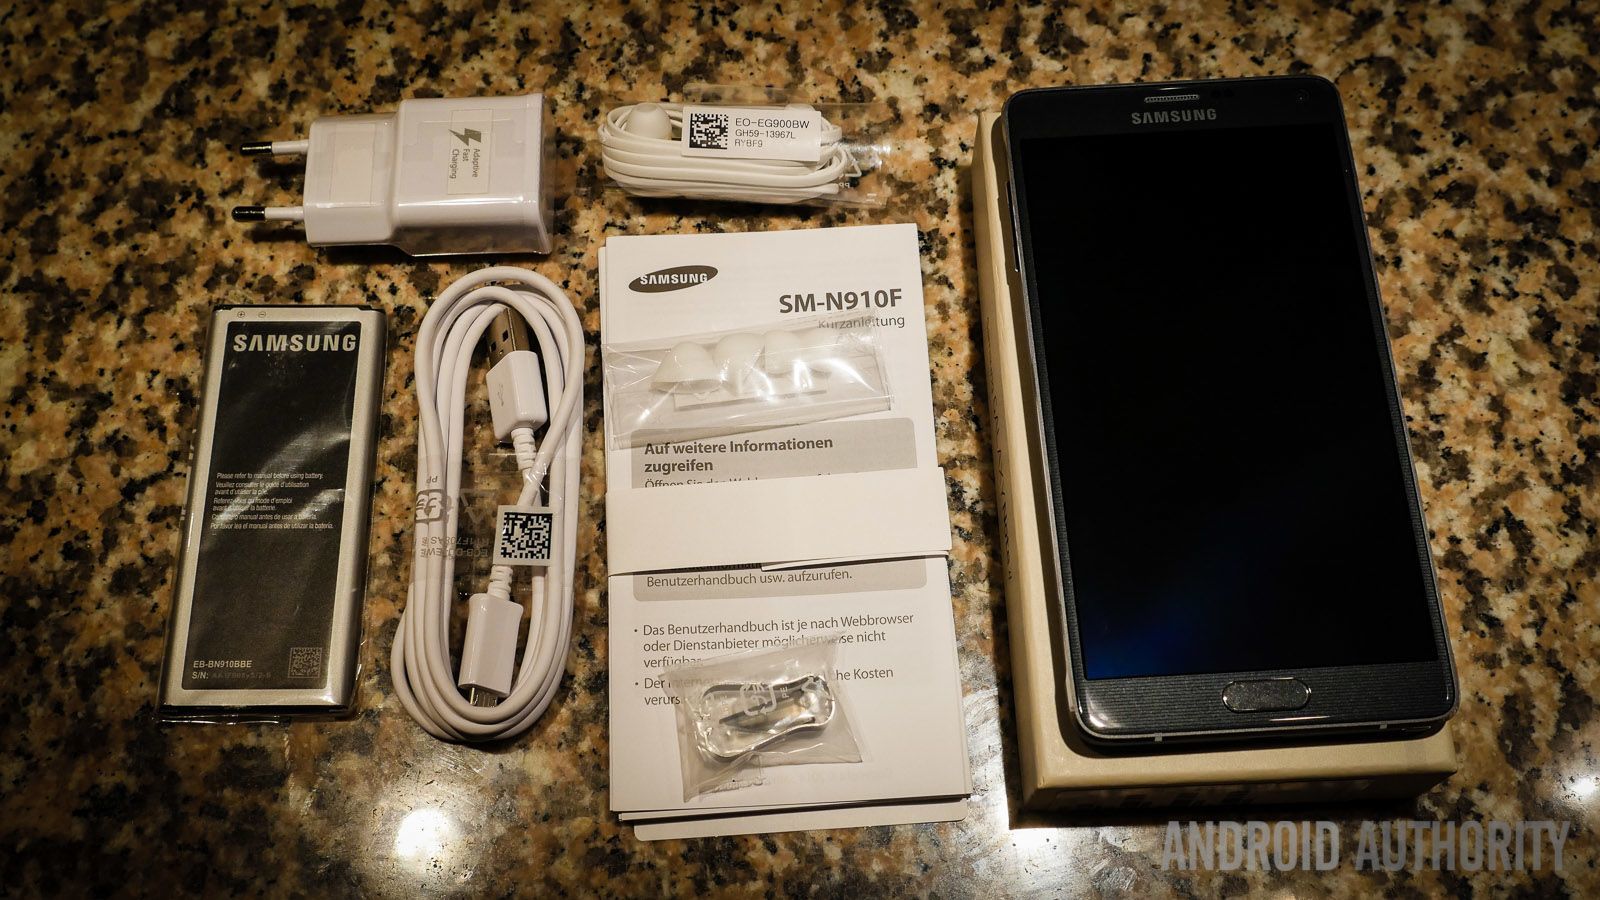 Overtreffen Scarp Frank Worthley Samsung Galaxy Note 4 unboxing and first impressions